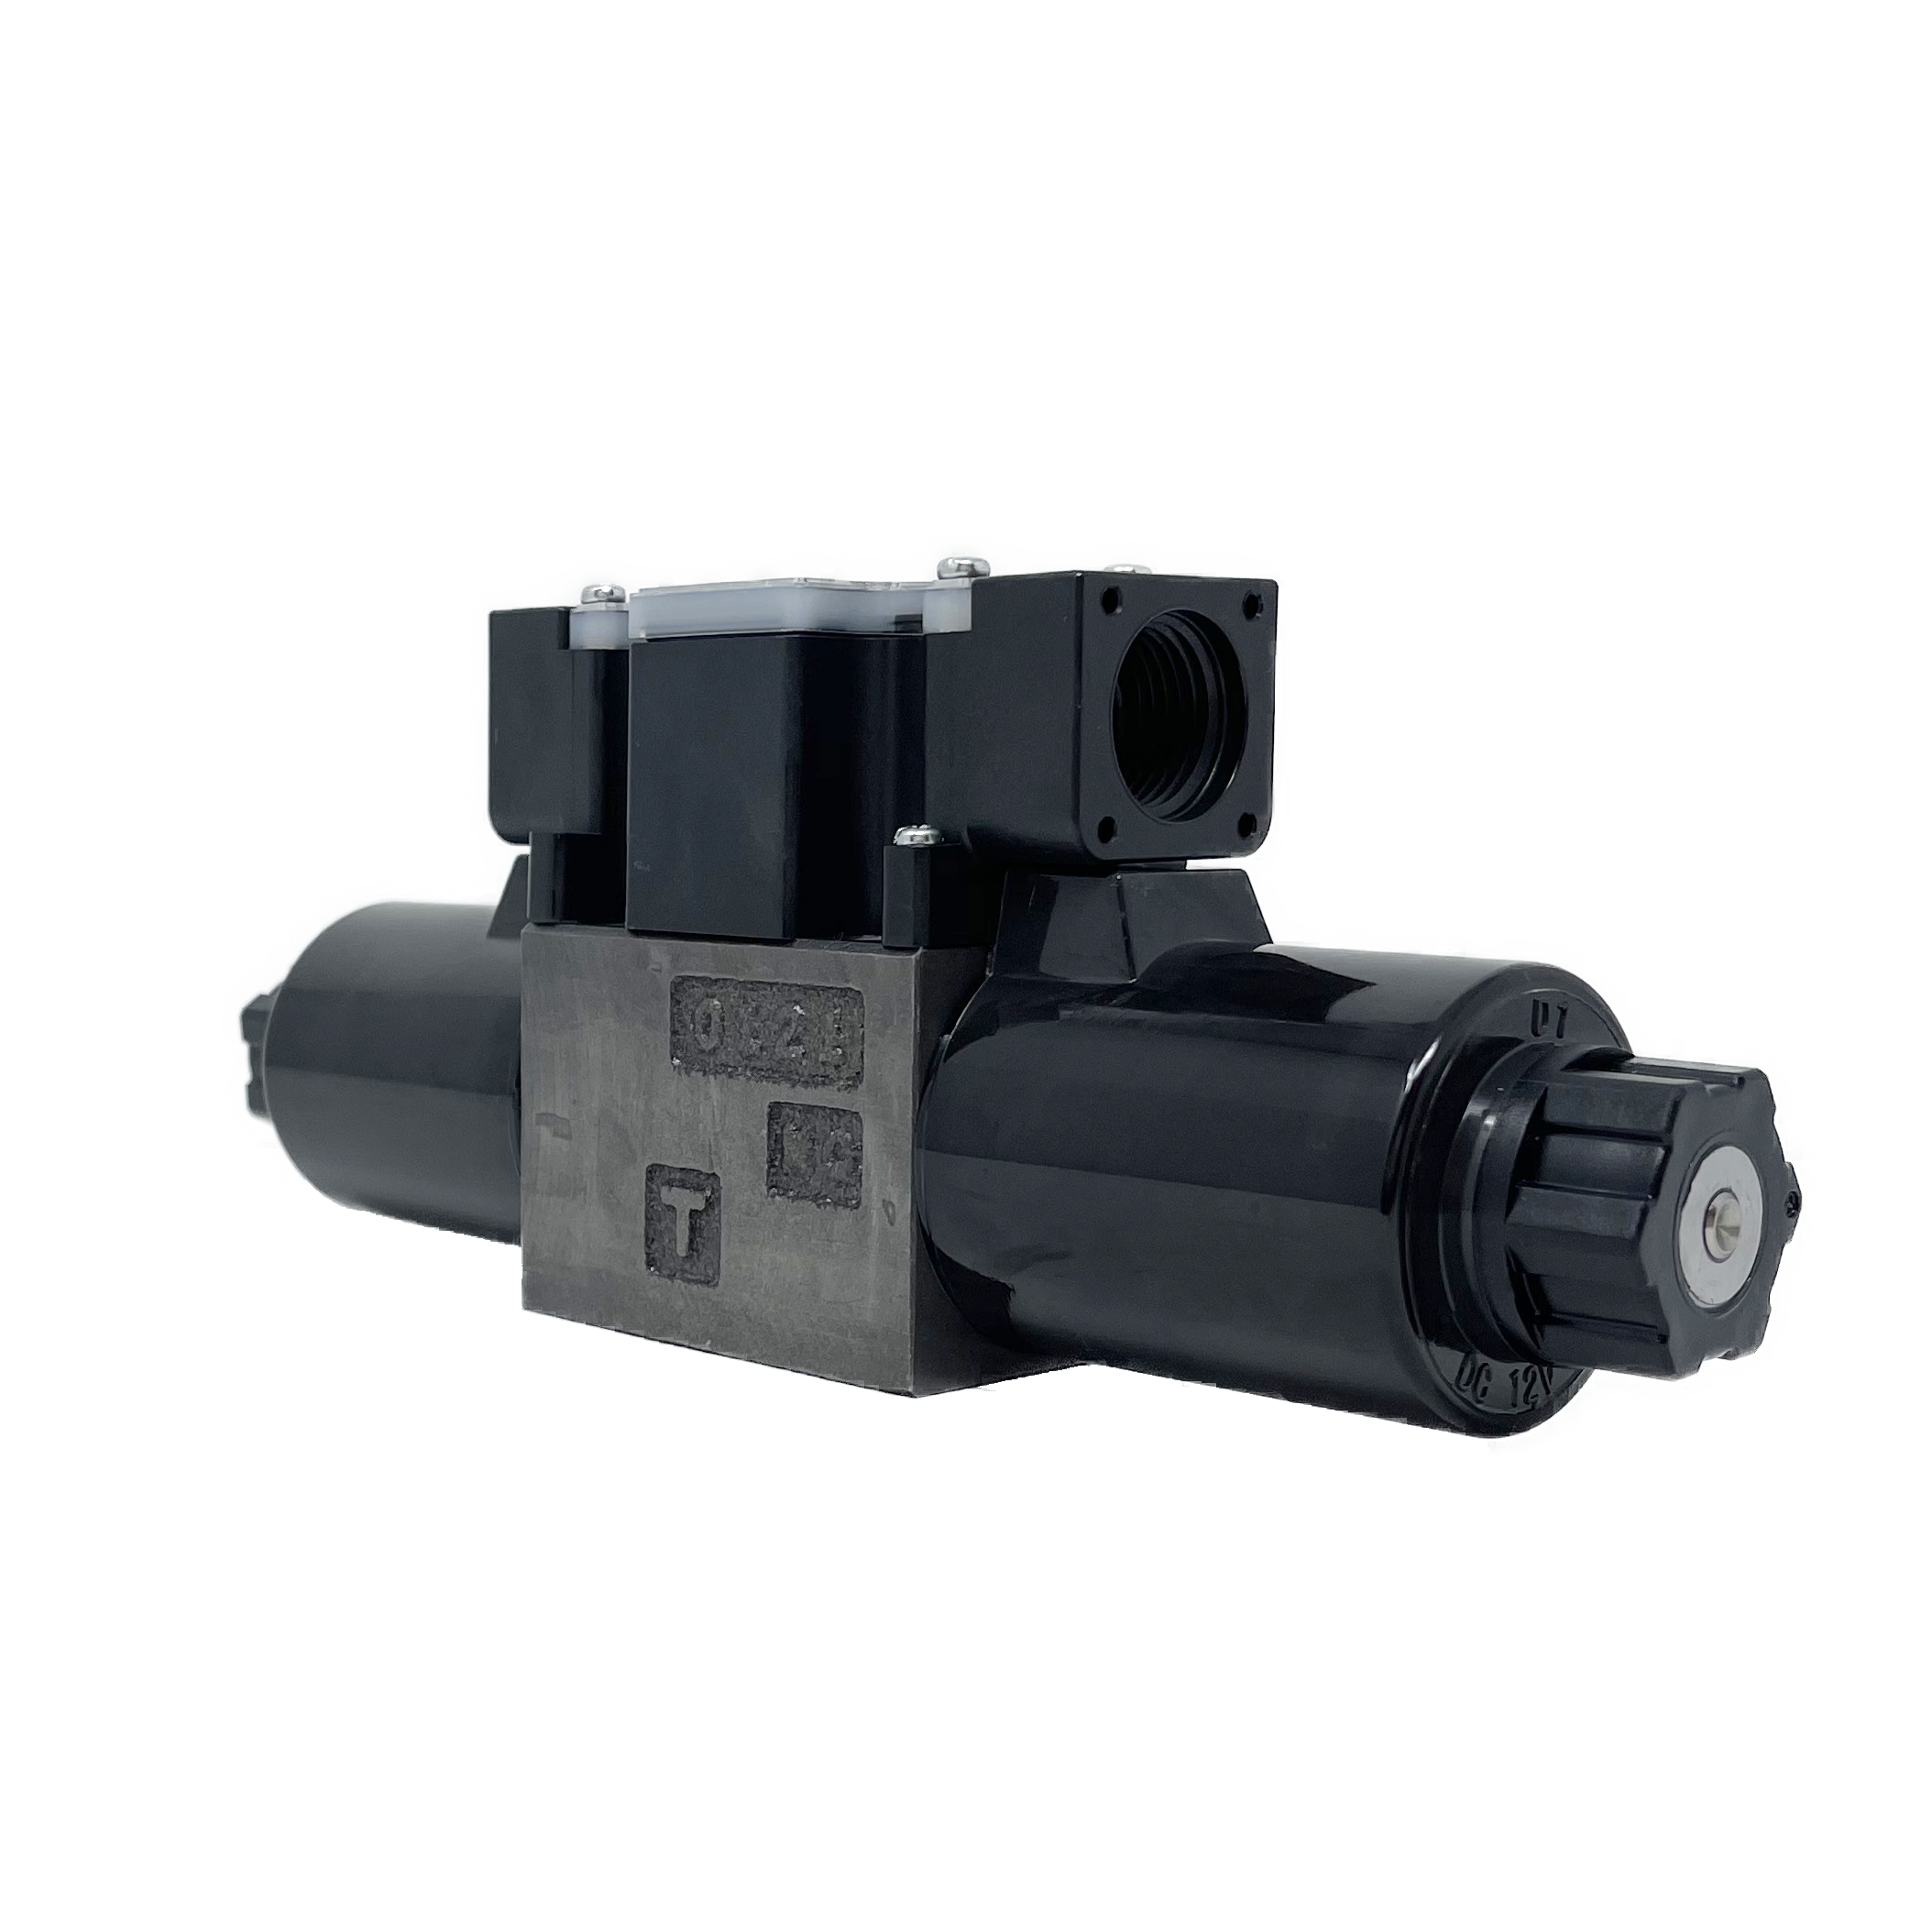 SS-G01-C4-R-C115-E31 : Nachi Solenoid Valve, 3P4W, D03 (NG6), 13.2GPM, 5075psi, All Ports Open Neutral, 110 VAC, Wiring Box with Lights